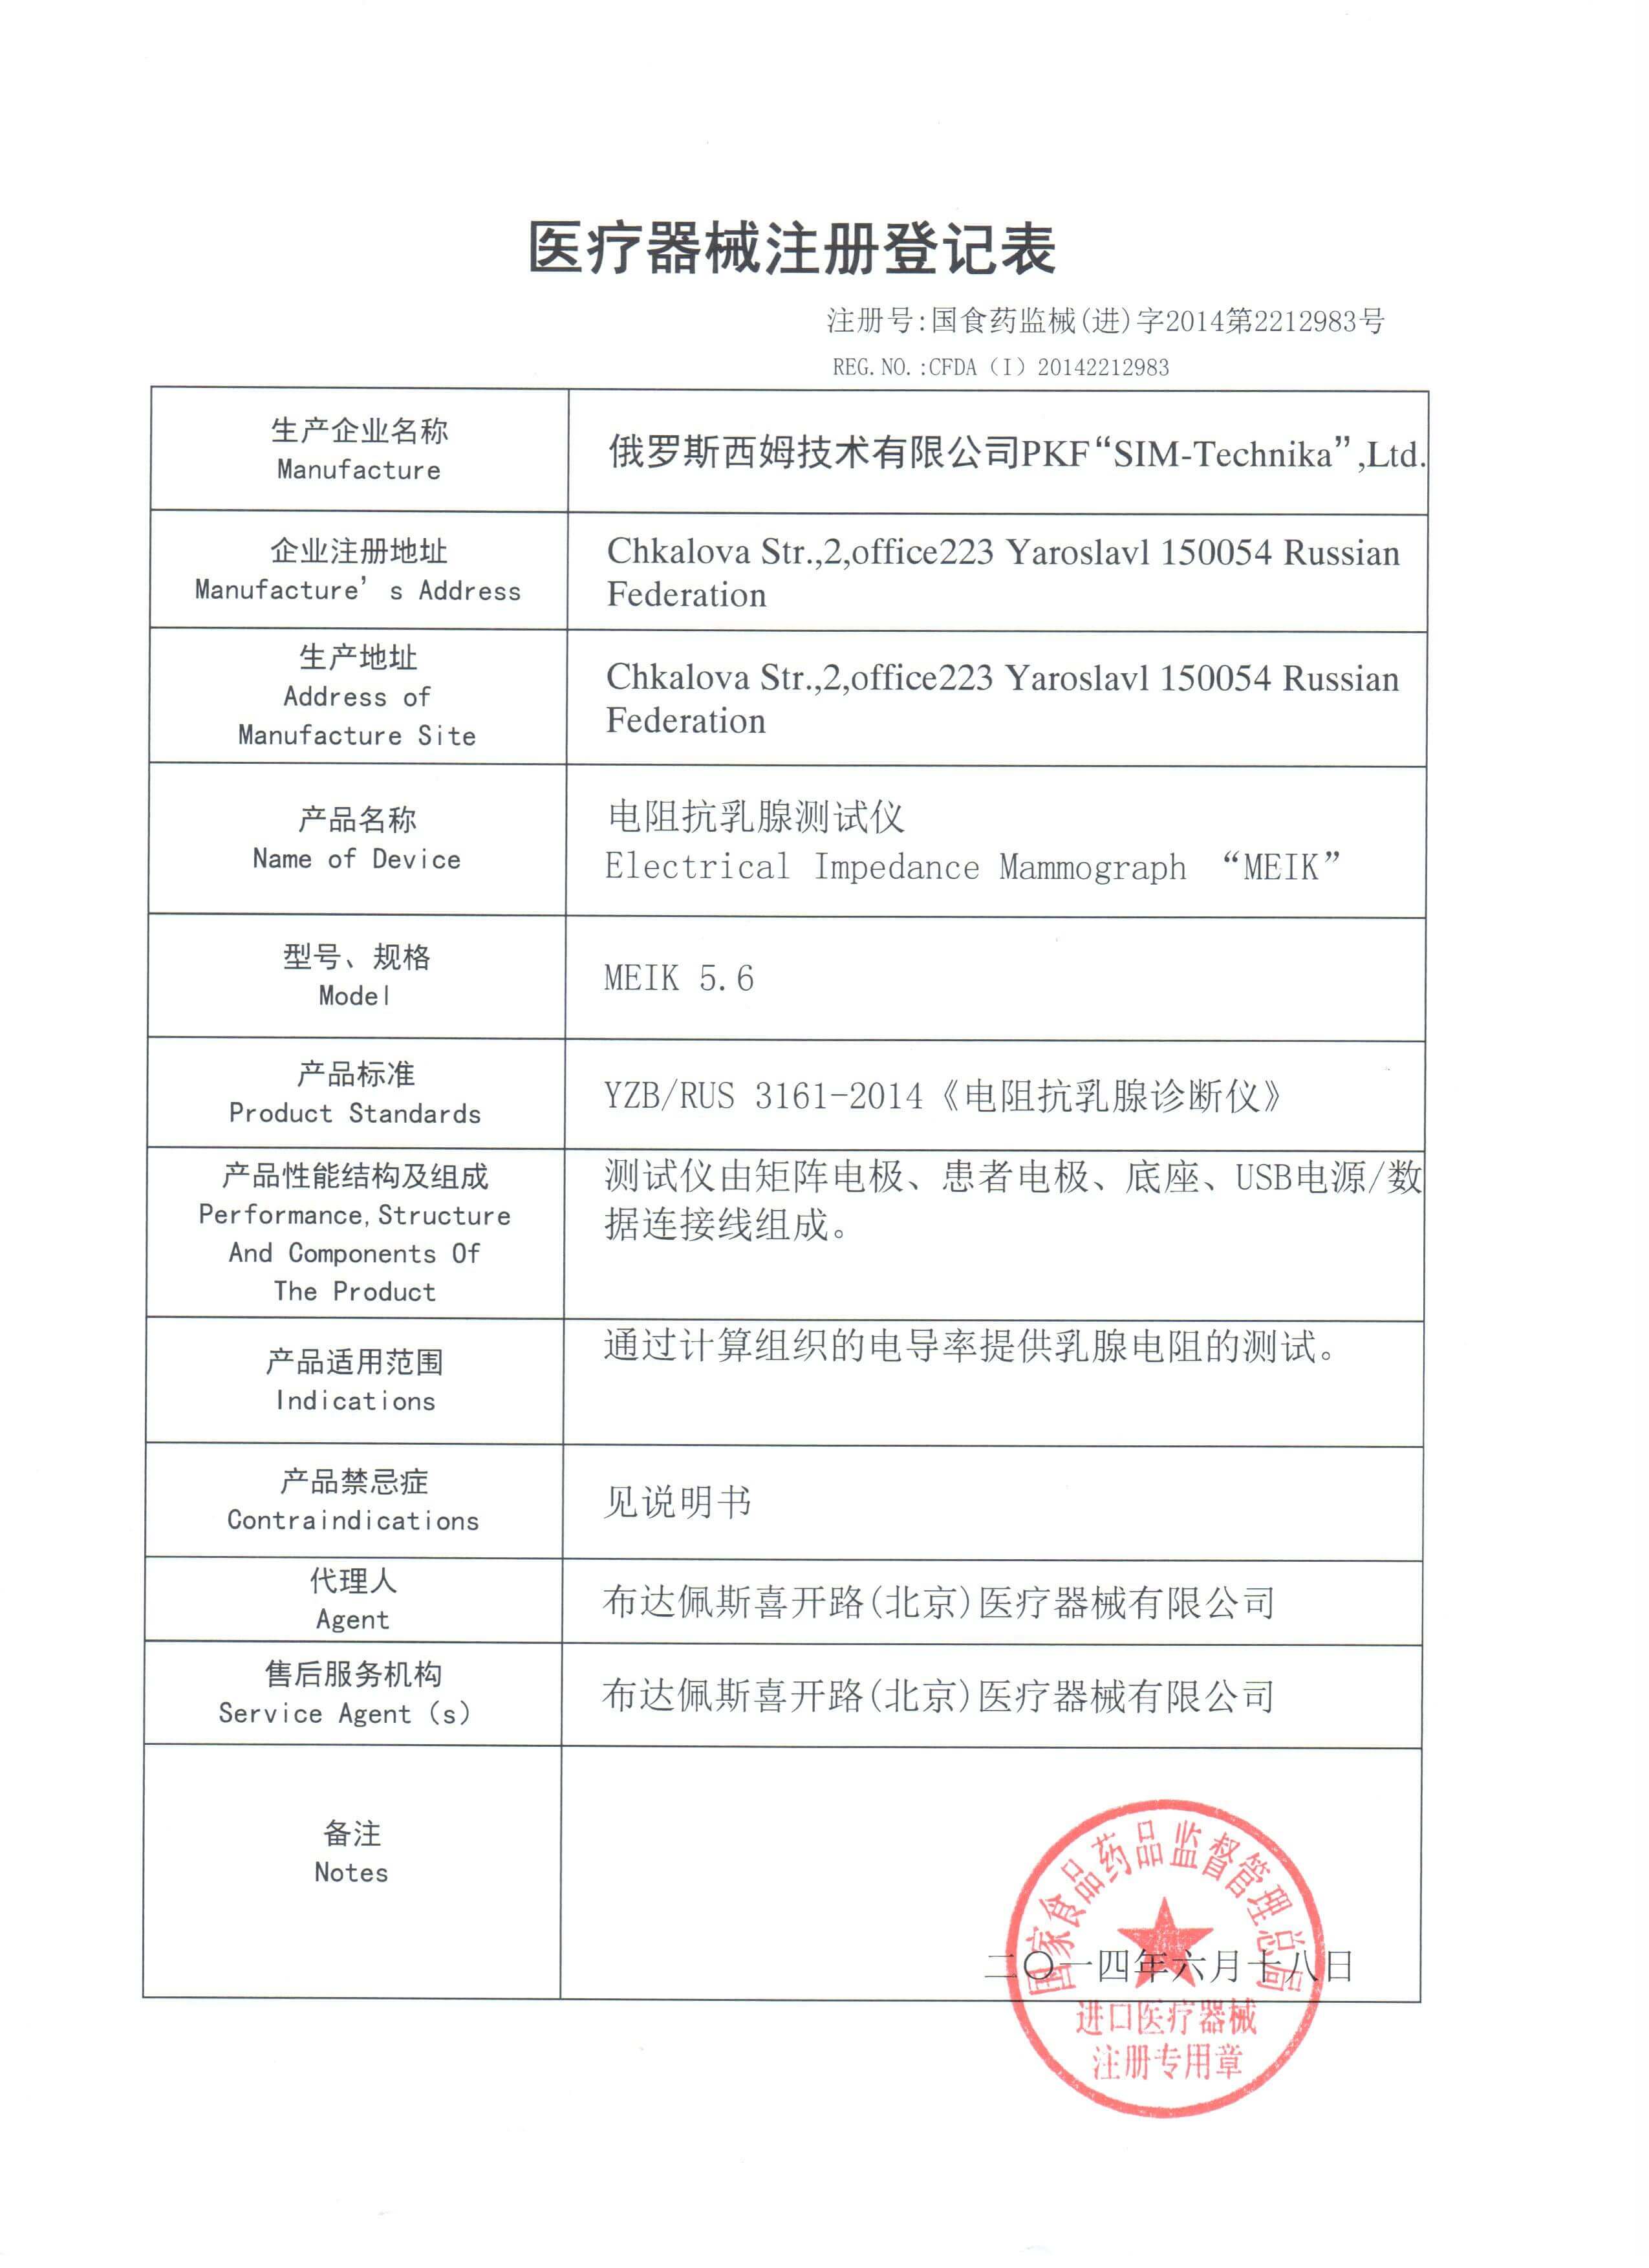 China MEIK electroimpedance electric impedance mammography harmless brest screening certificate